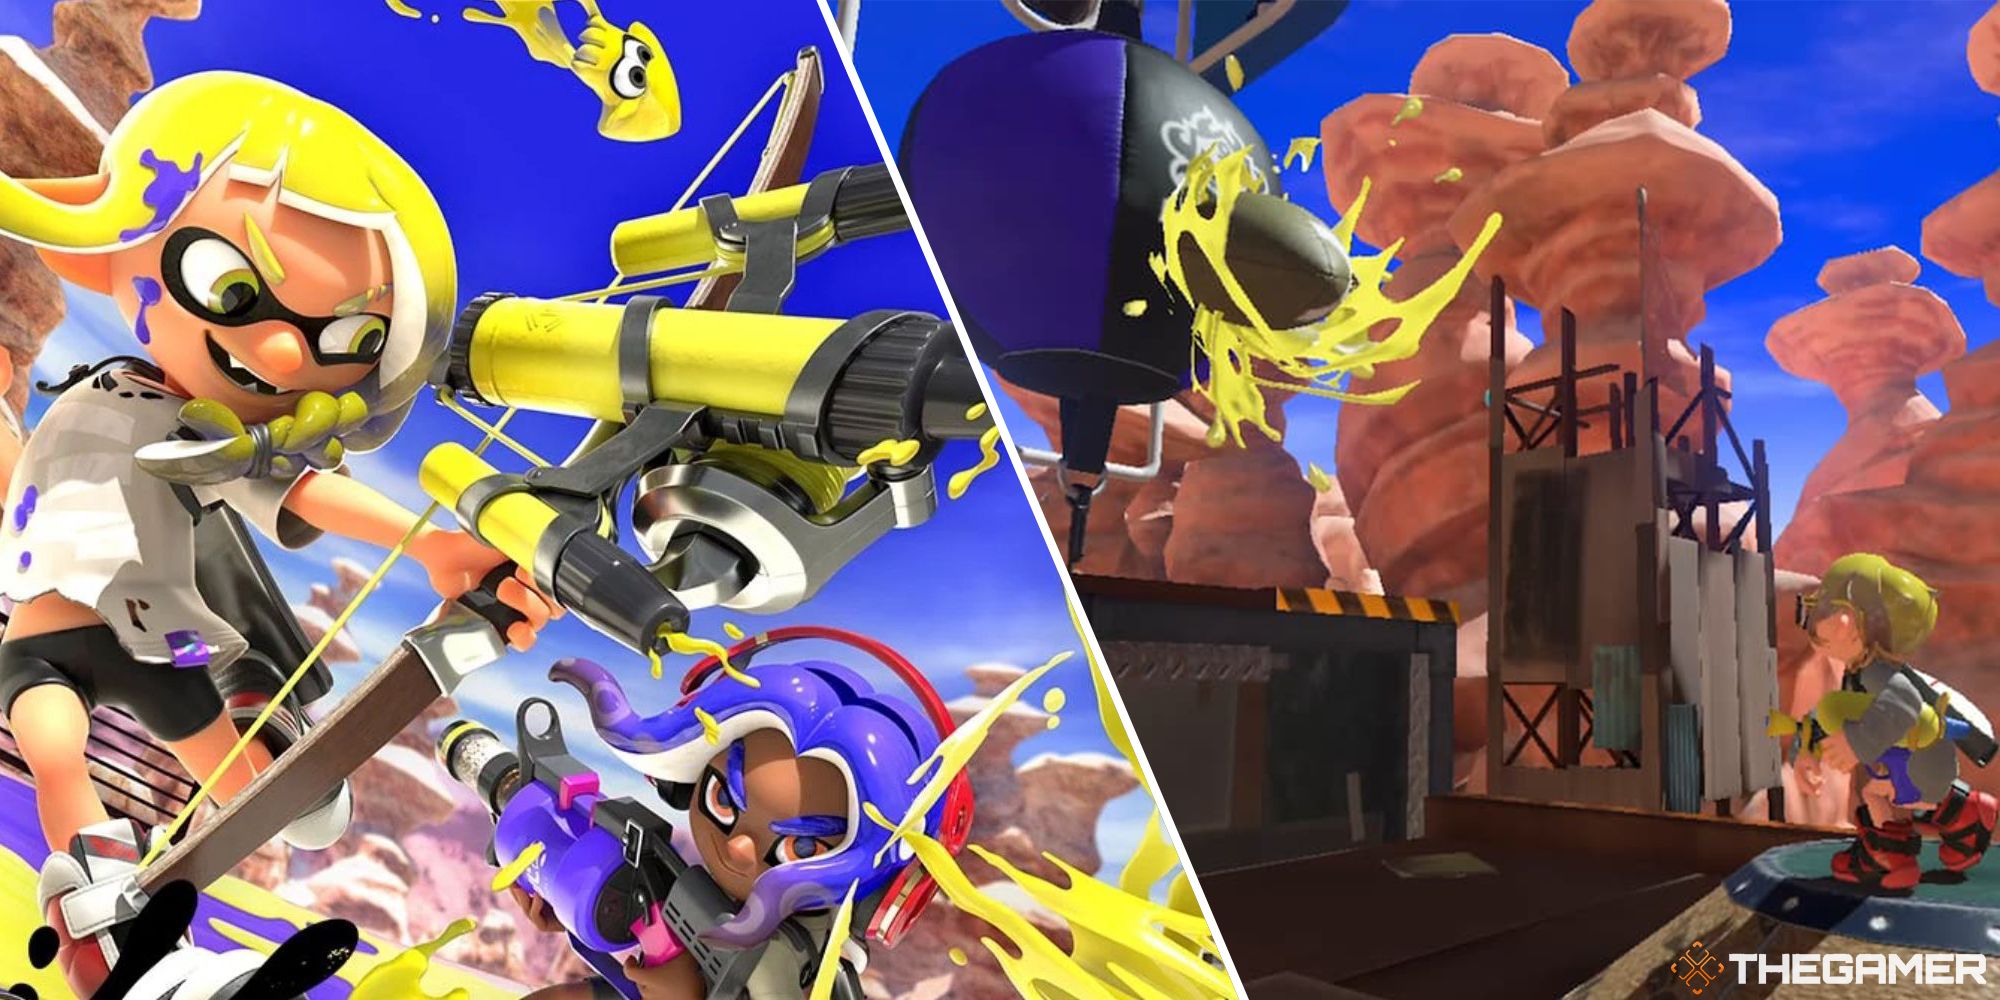 inkling firing splat bow and player throwing power clam into barrier in clam blitz split image